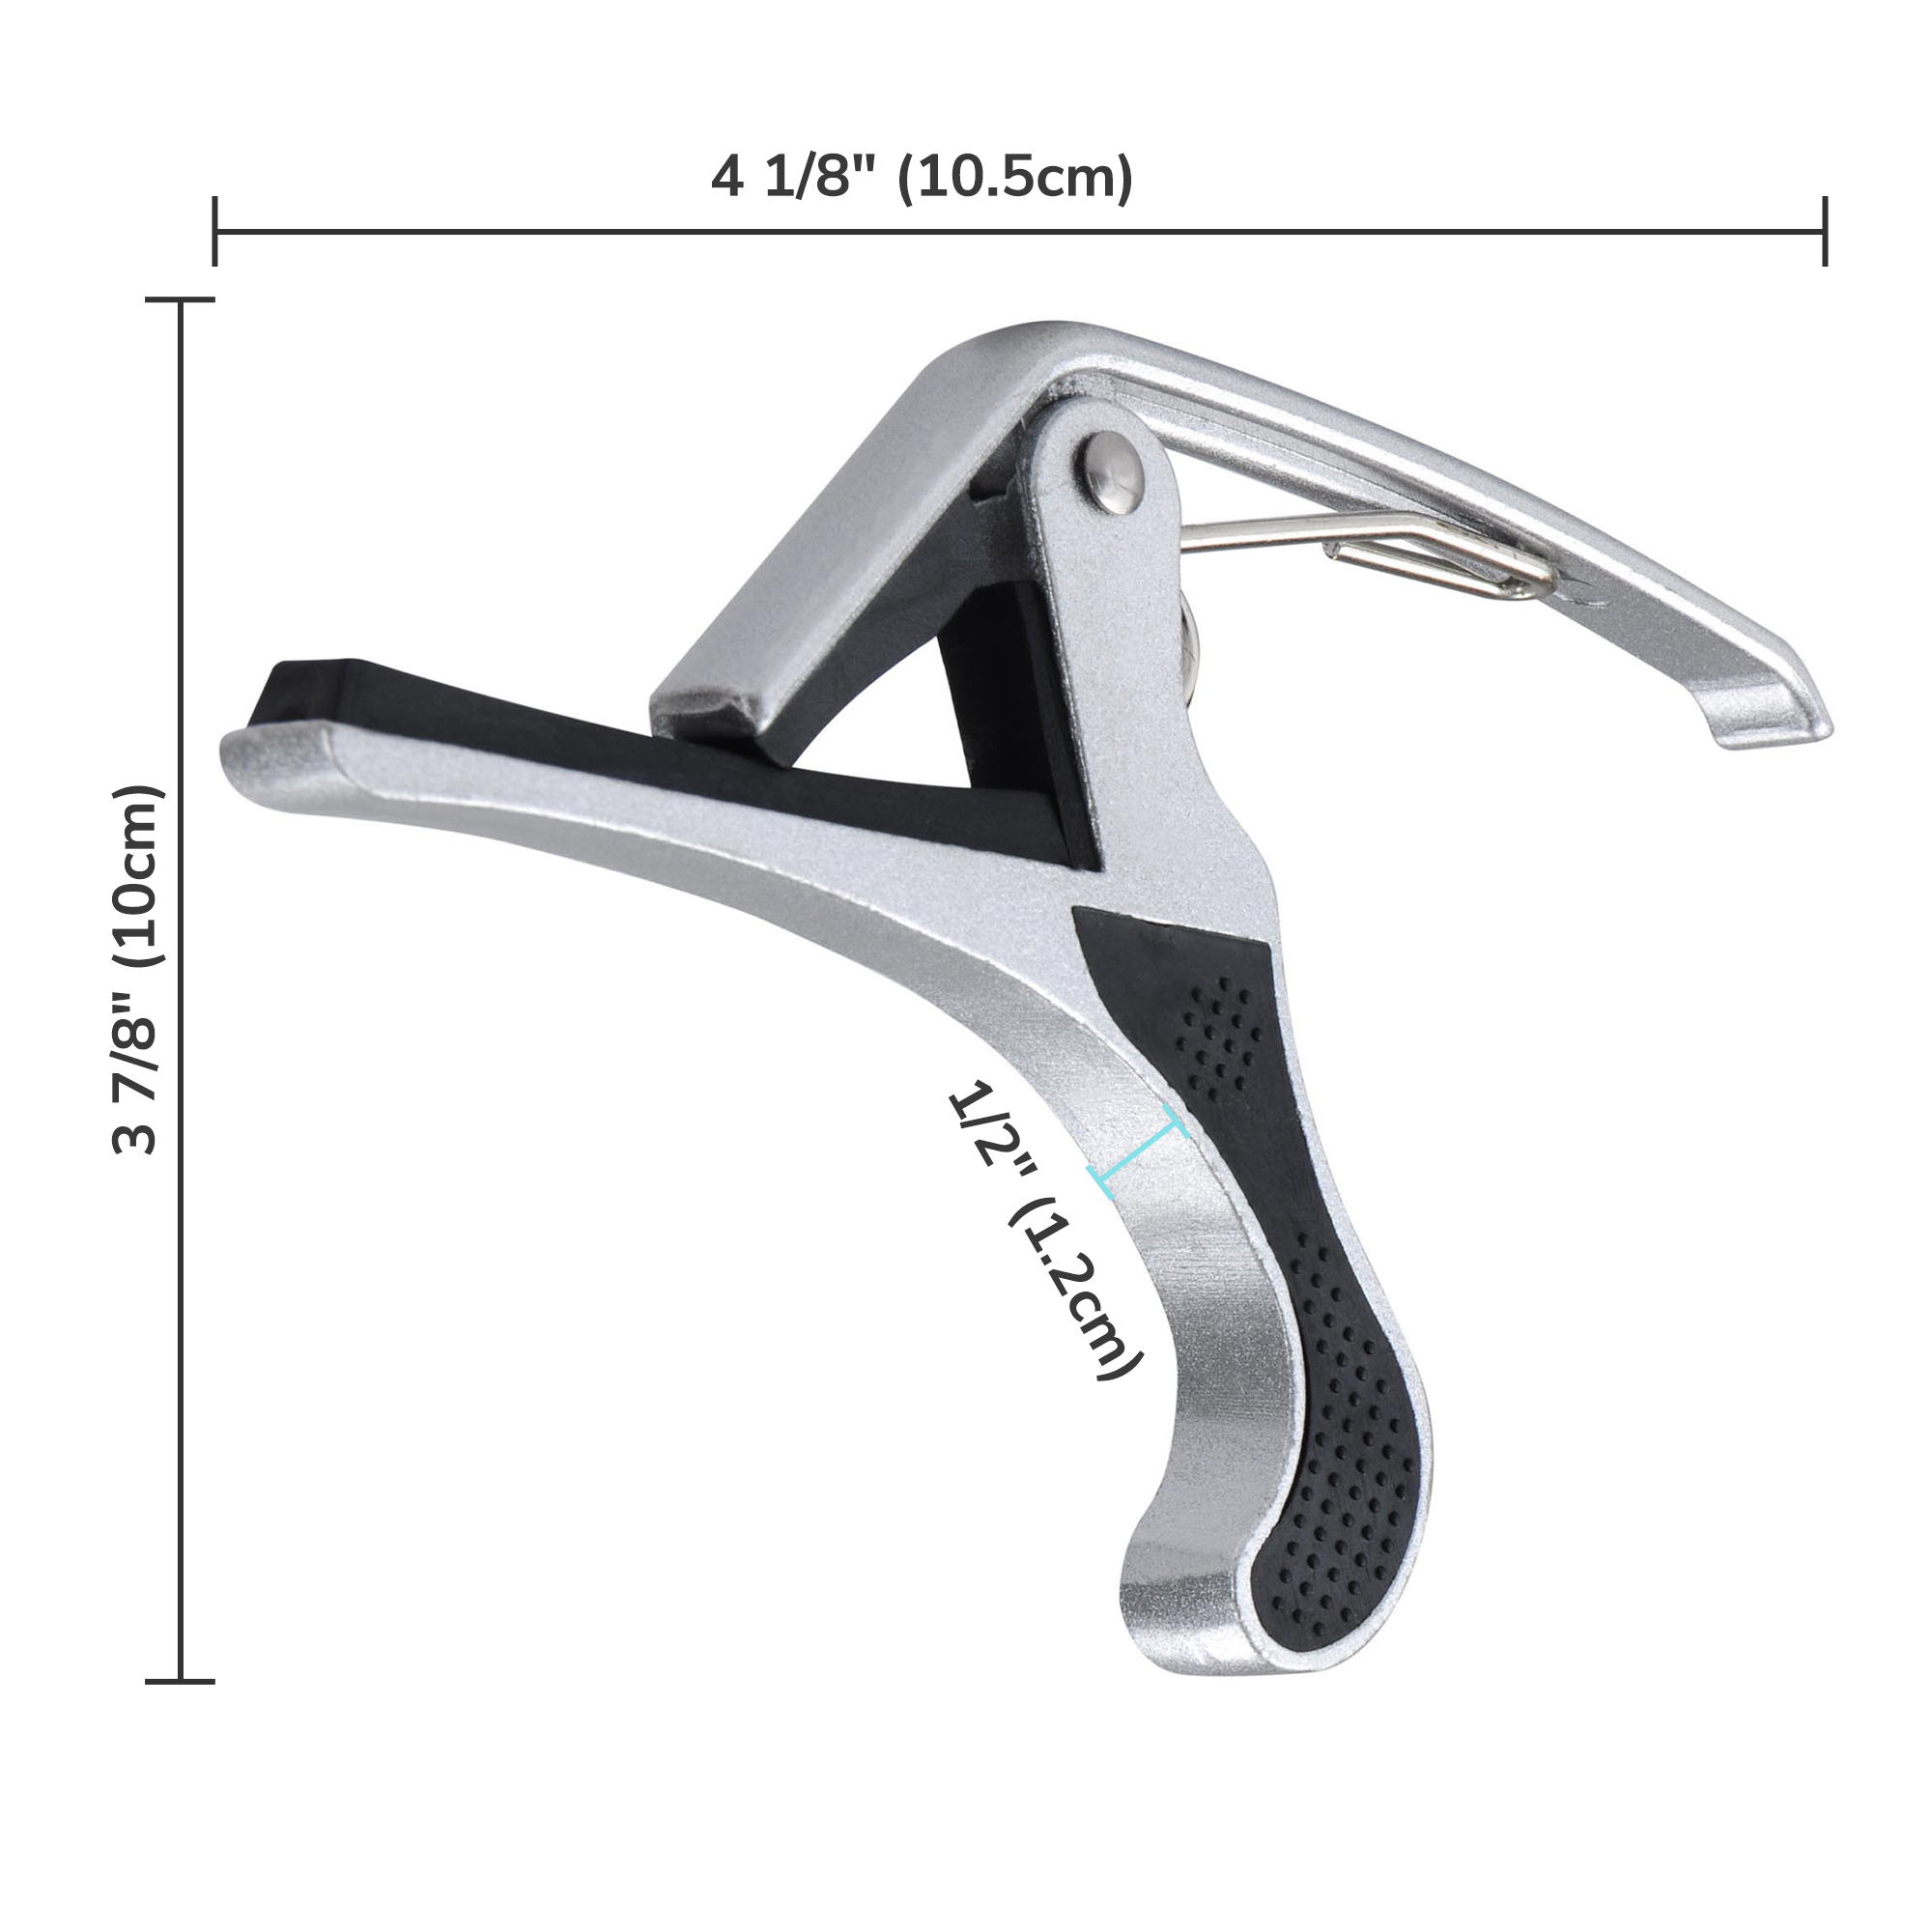 Yescom Change Tune Clamp Key Trigger Capo For Acoustic Electric Classical Guitar Silver